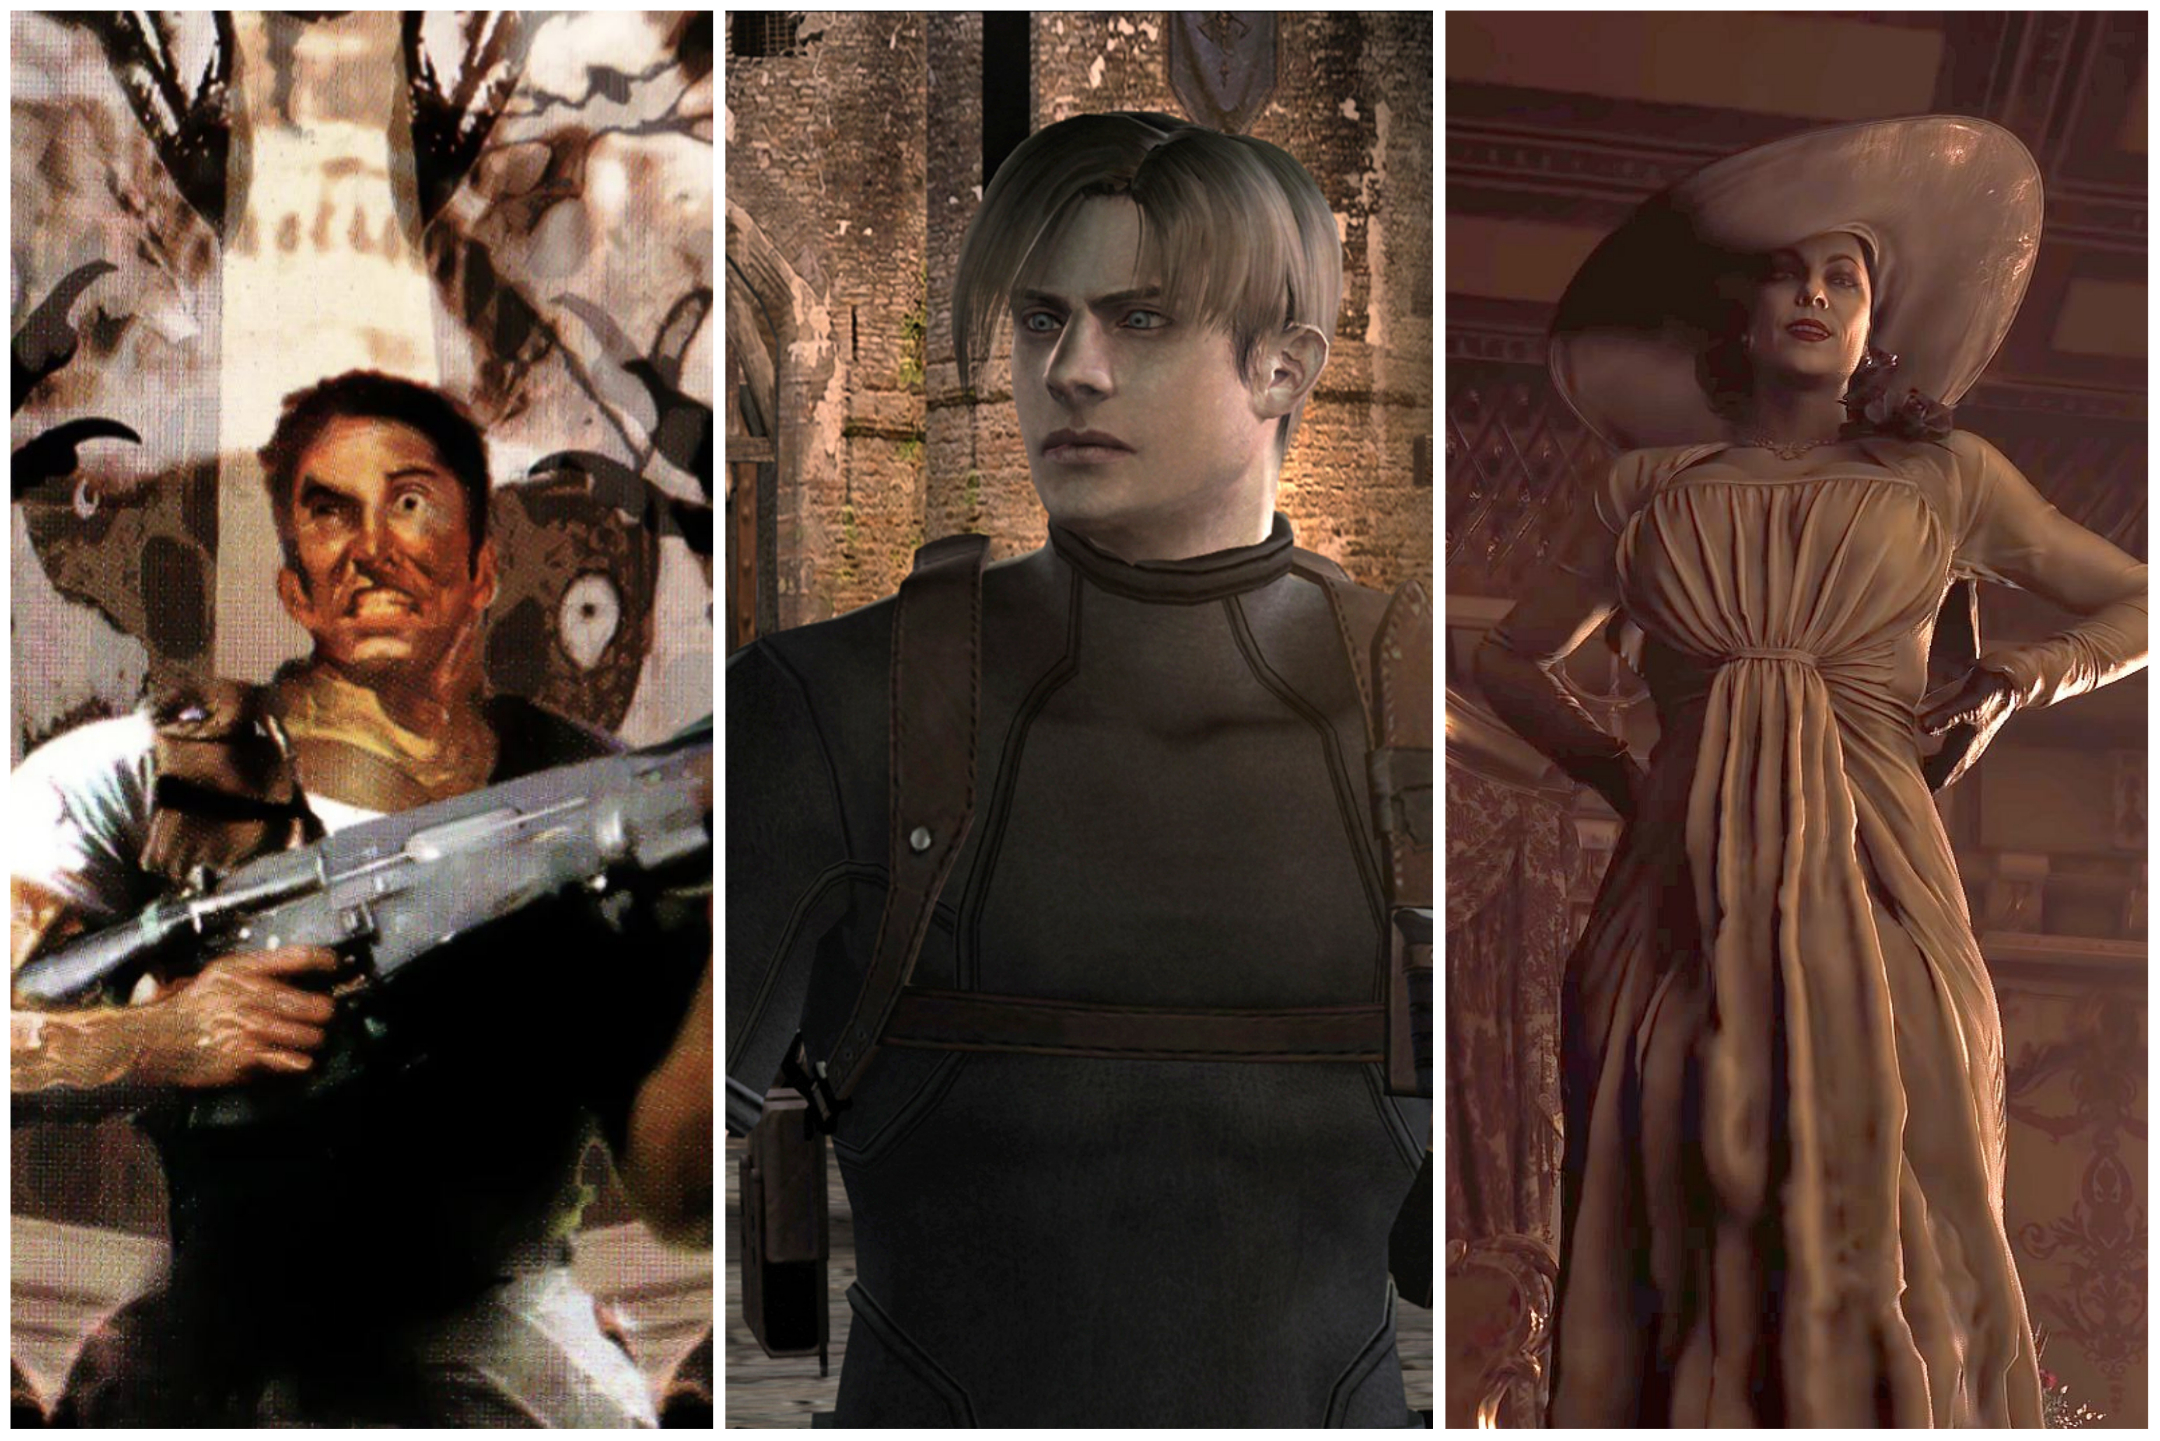 Every Resident Evil Movie Ranked, According to Critics